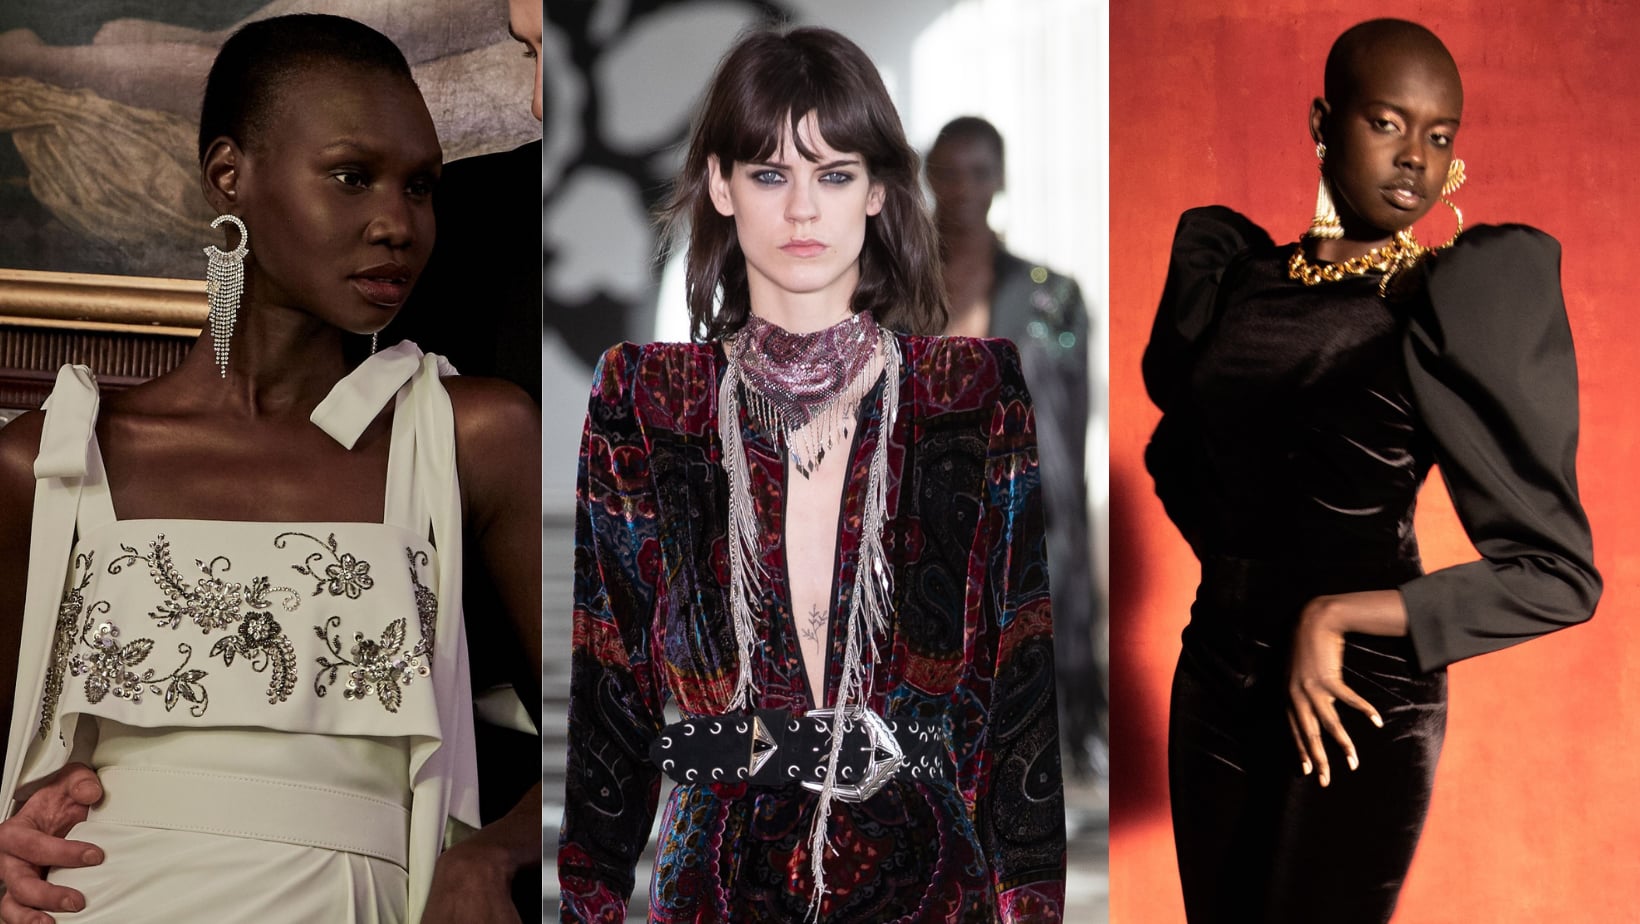 Six top jewellery trends for winter 2021: necklaces, rings